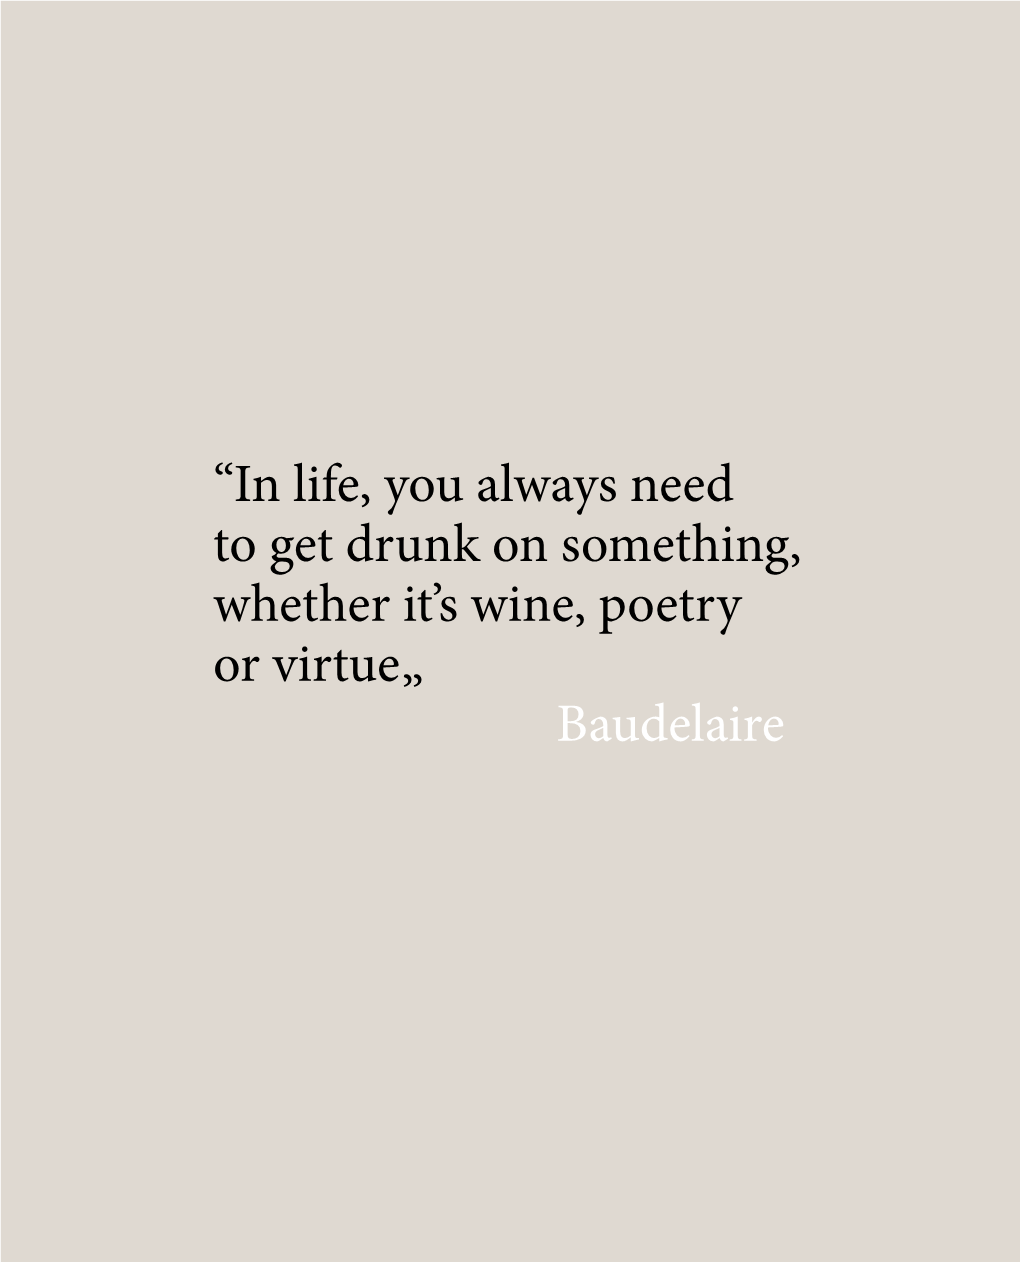 “In Life, You Always Need to Get Drunk on Something, Whether It's Wine